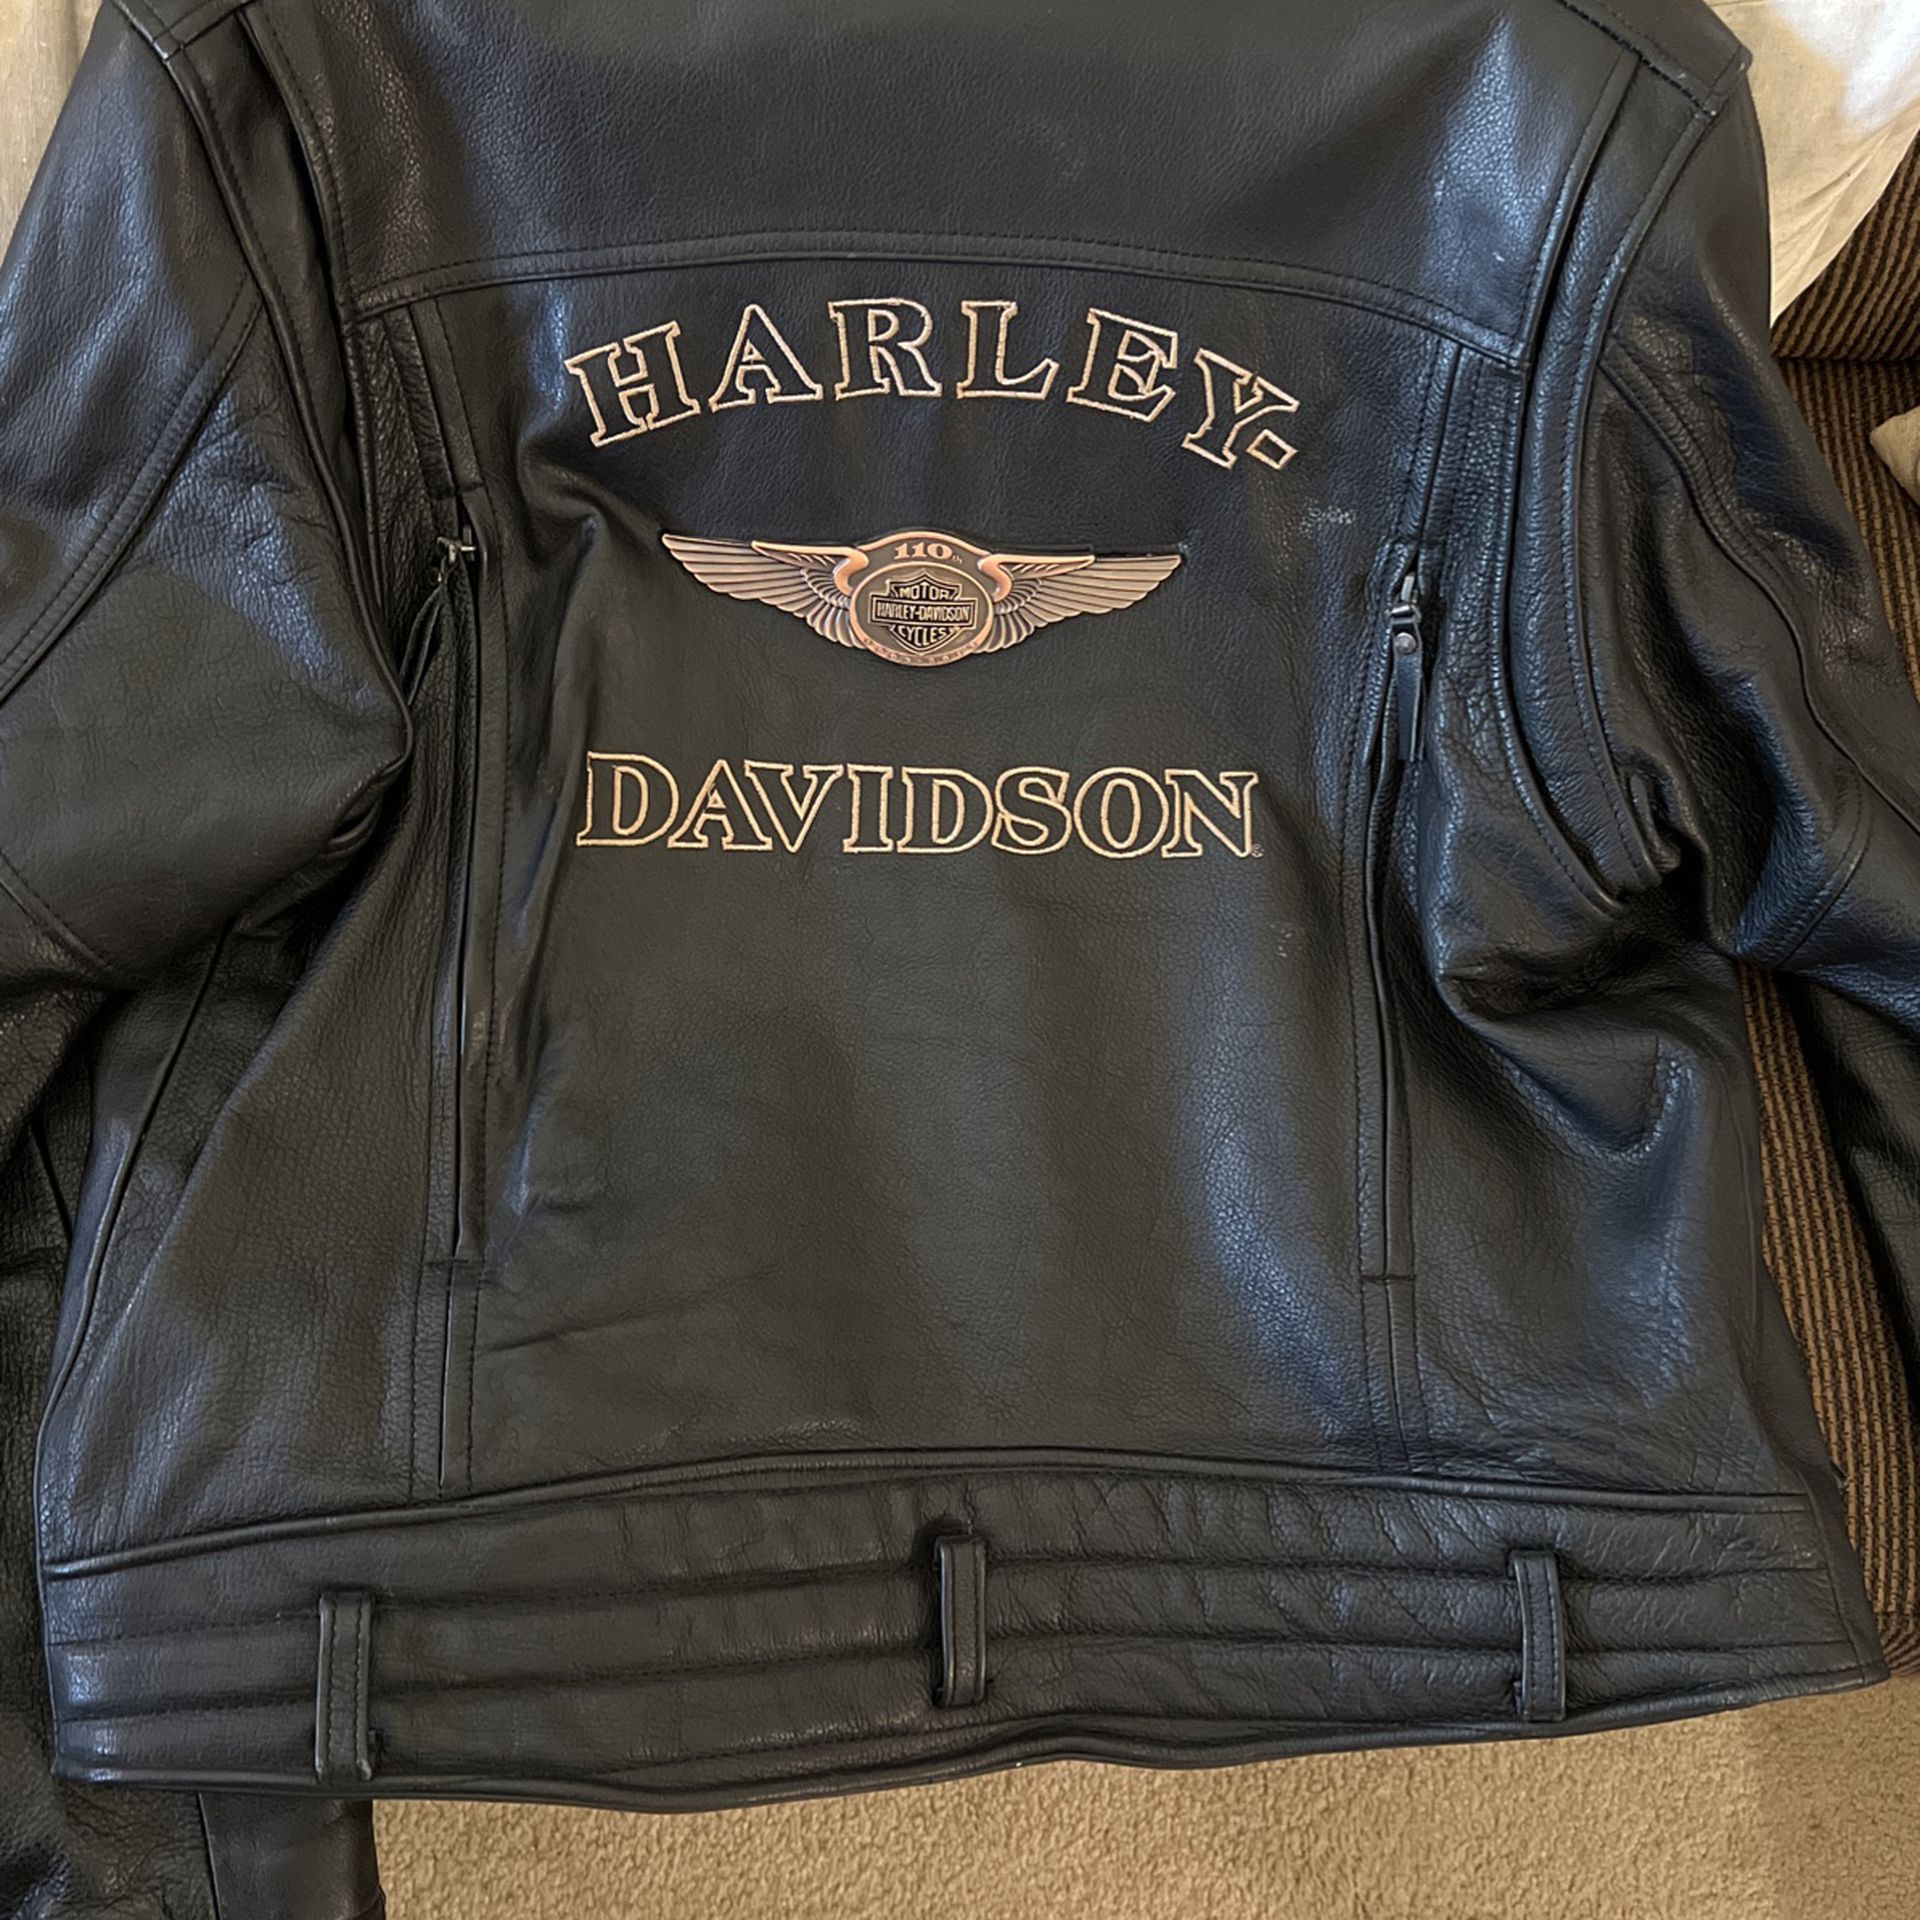 Harley Davidson 110th Anniversary Leather Jacket for Sale in Sun City ...